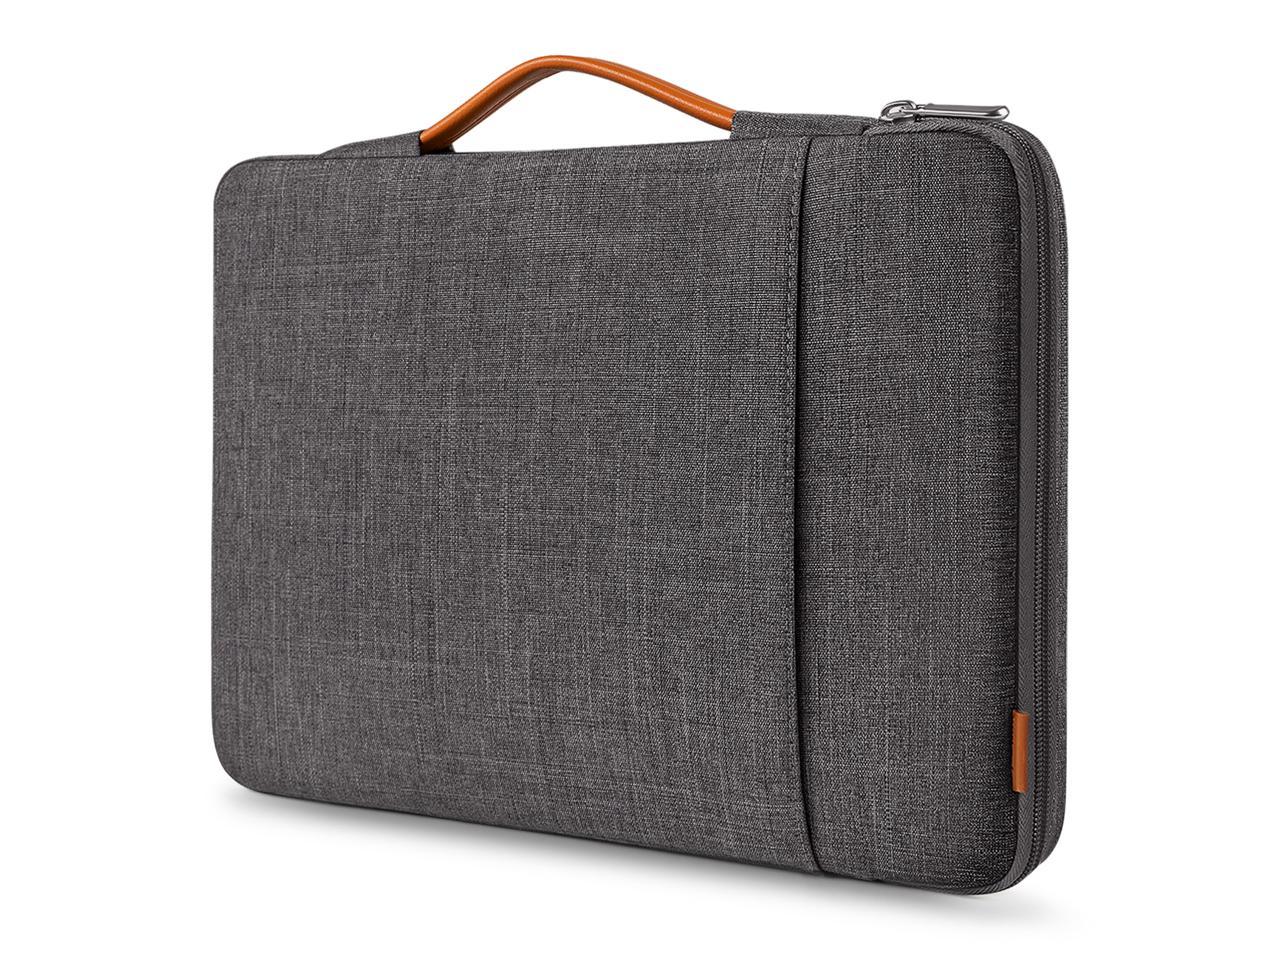 Elastic Sleeve Case Carry Bag Pouch Cover for 13inch Macbook Air/Pro Surface Pro 